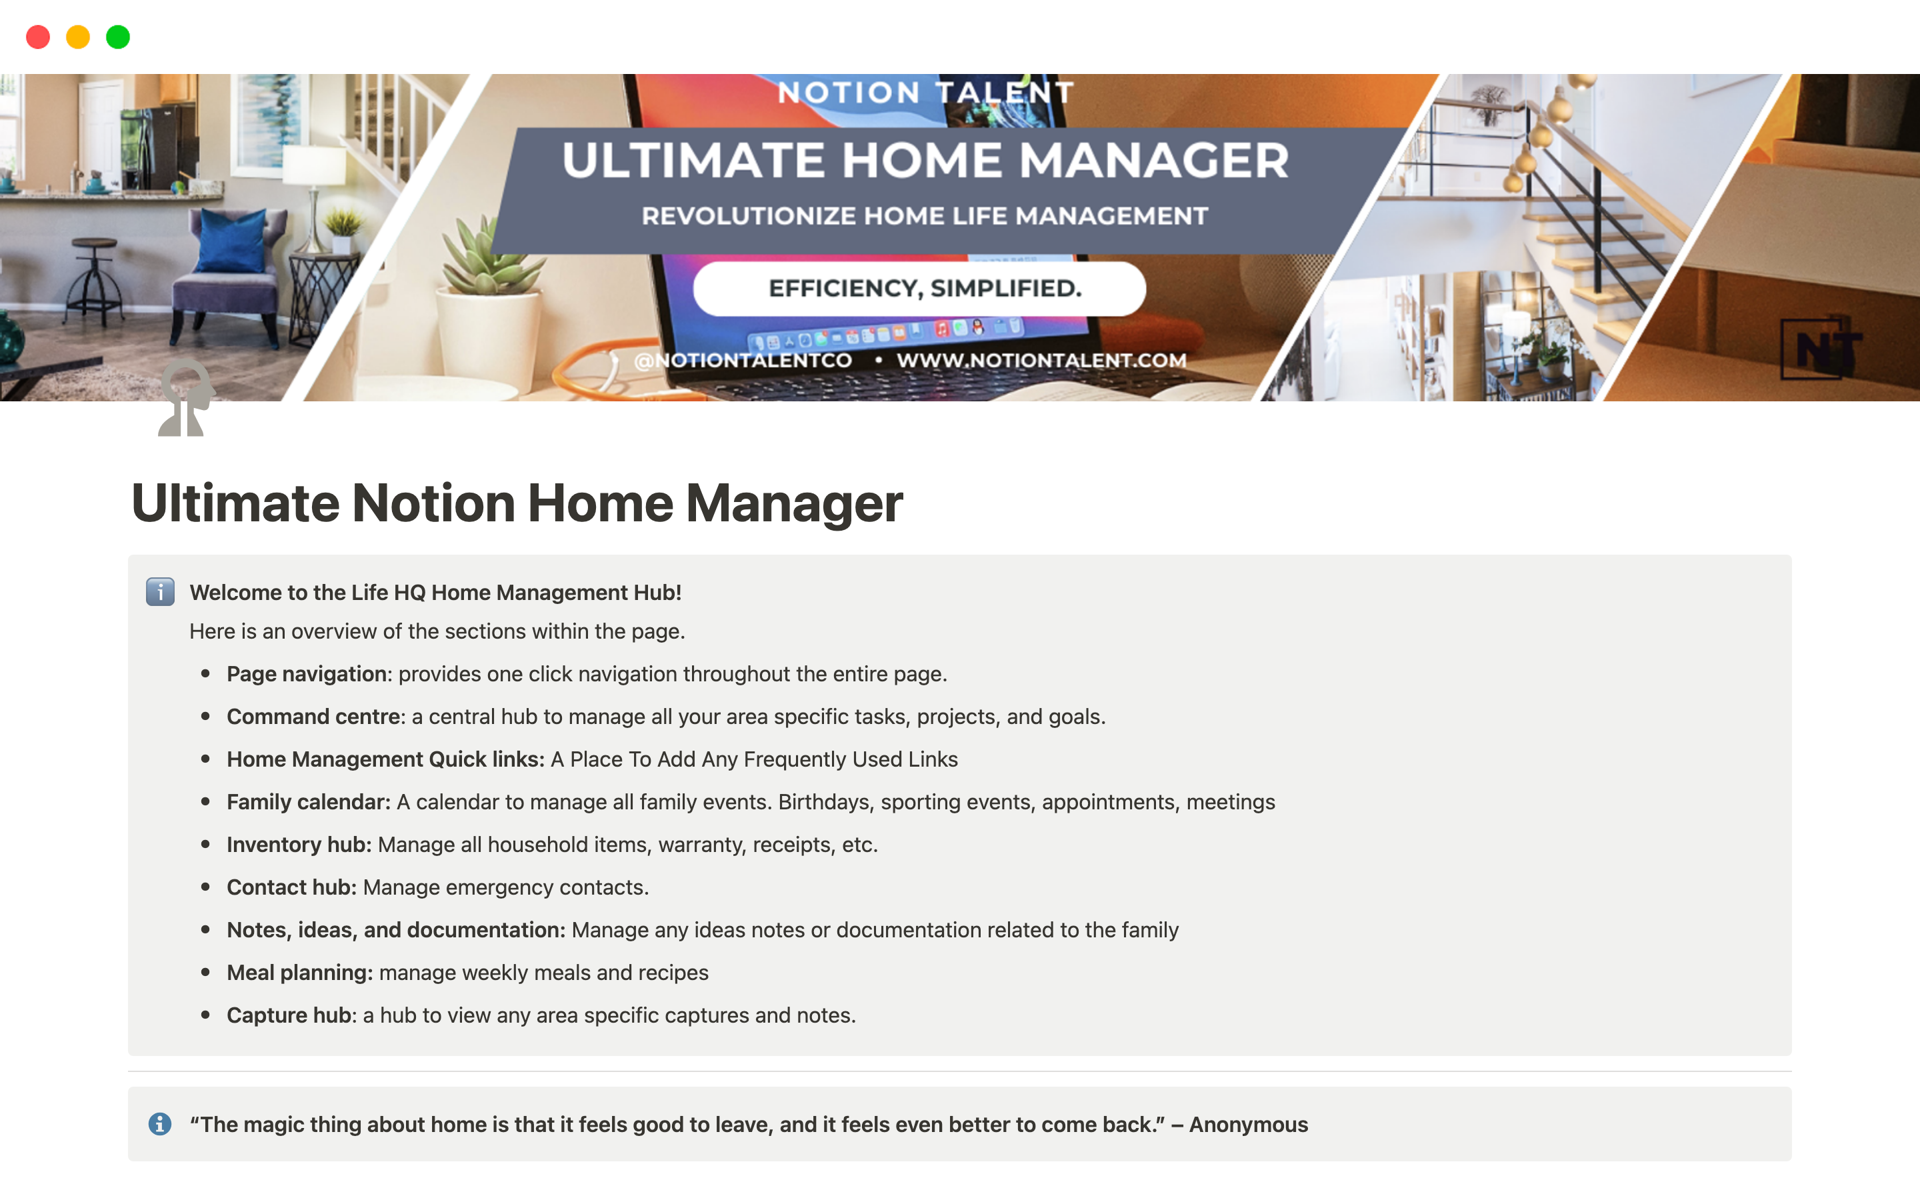 Transform your household organization with the Ultimate Notion Home Management Hub, a comprehensive Notion template designed to simplify and streamline every aspect of home management.